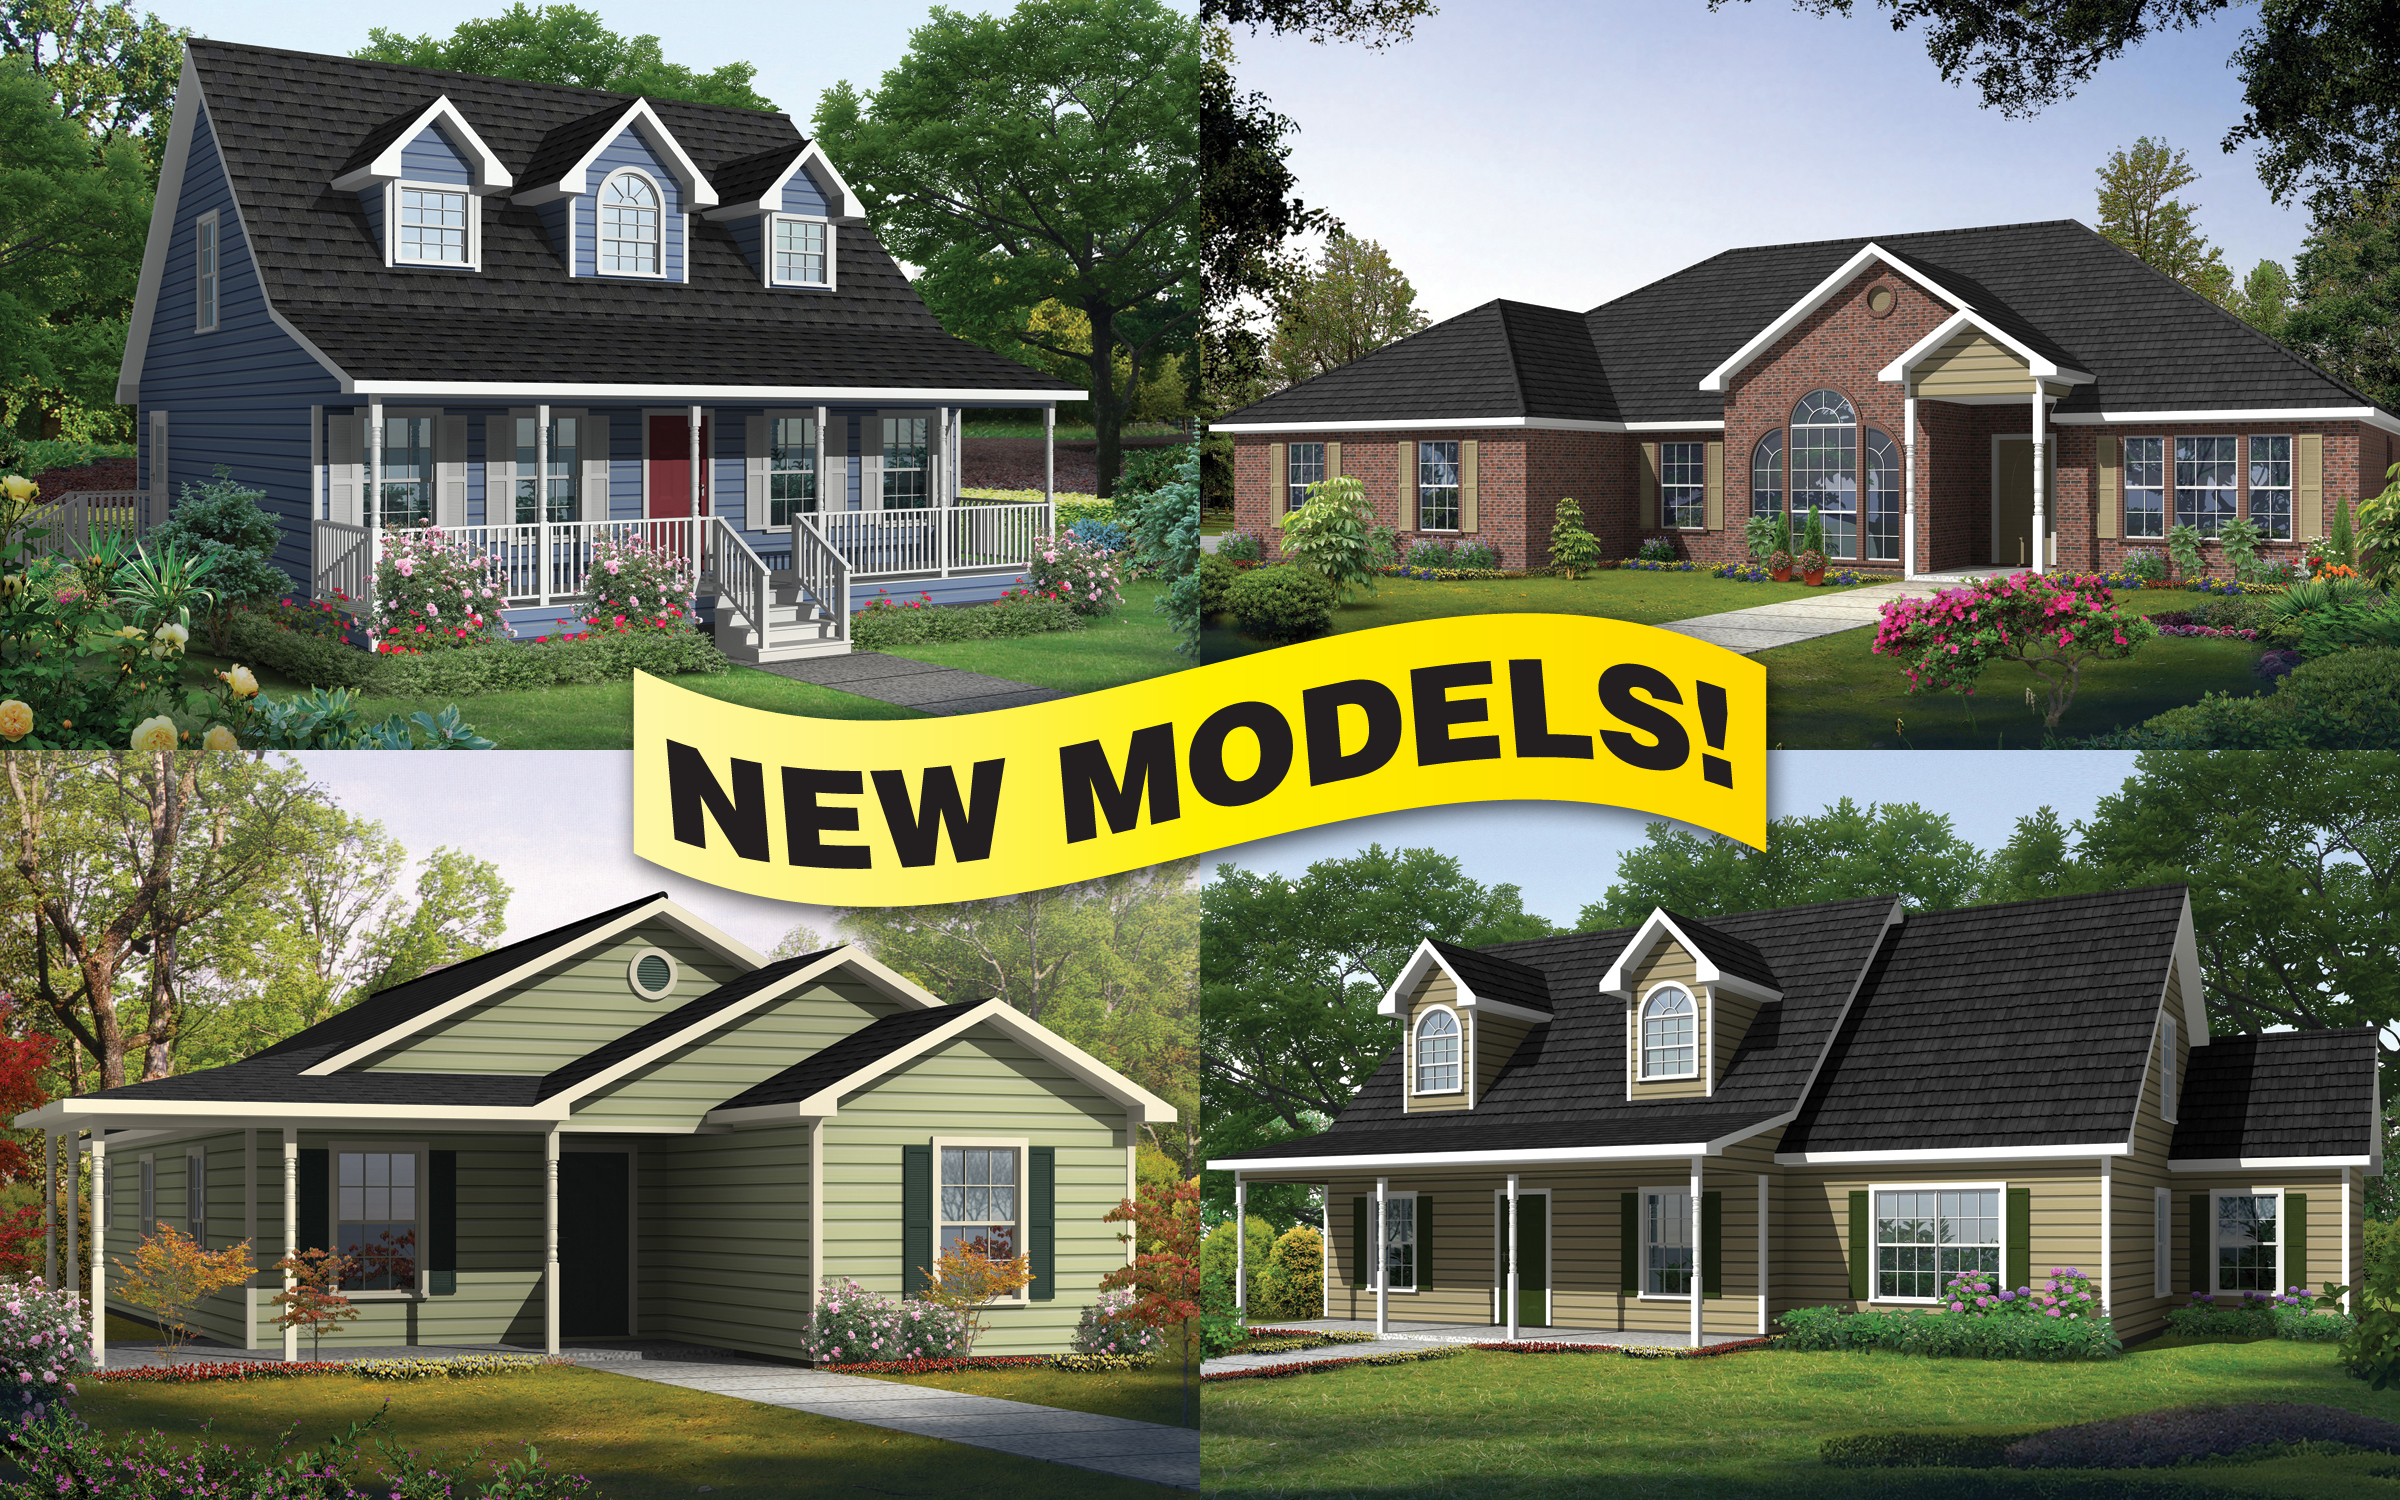 UnitedBilt Homes Adds 22 New Models Zero Down and No Payments for Six Months Available